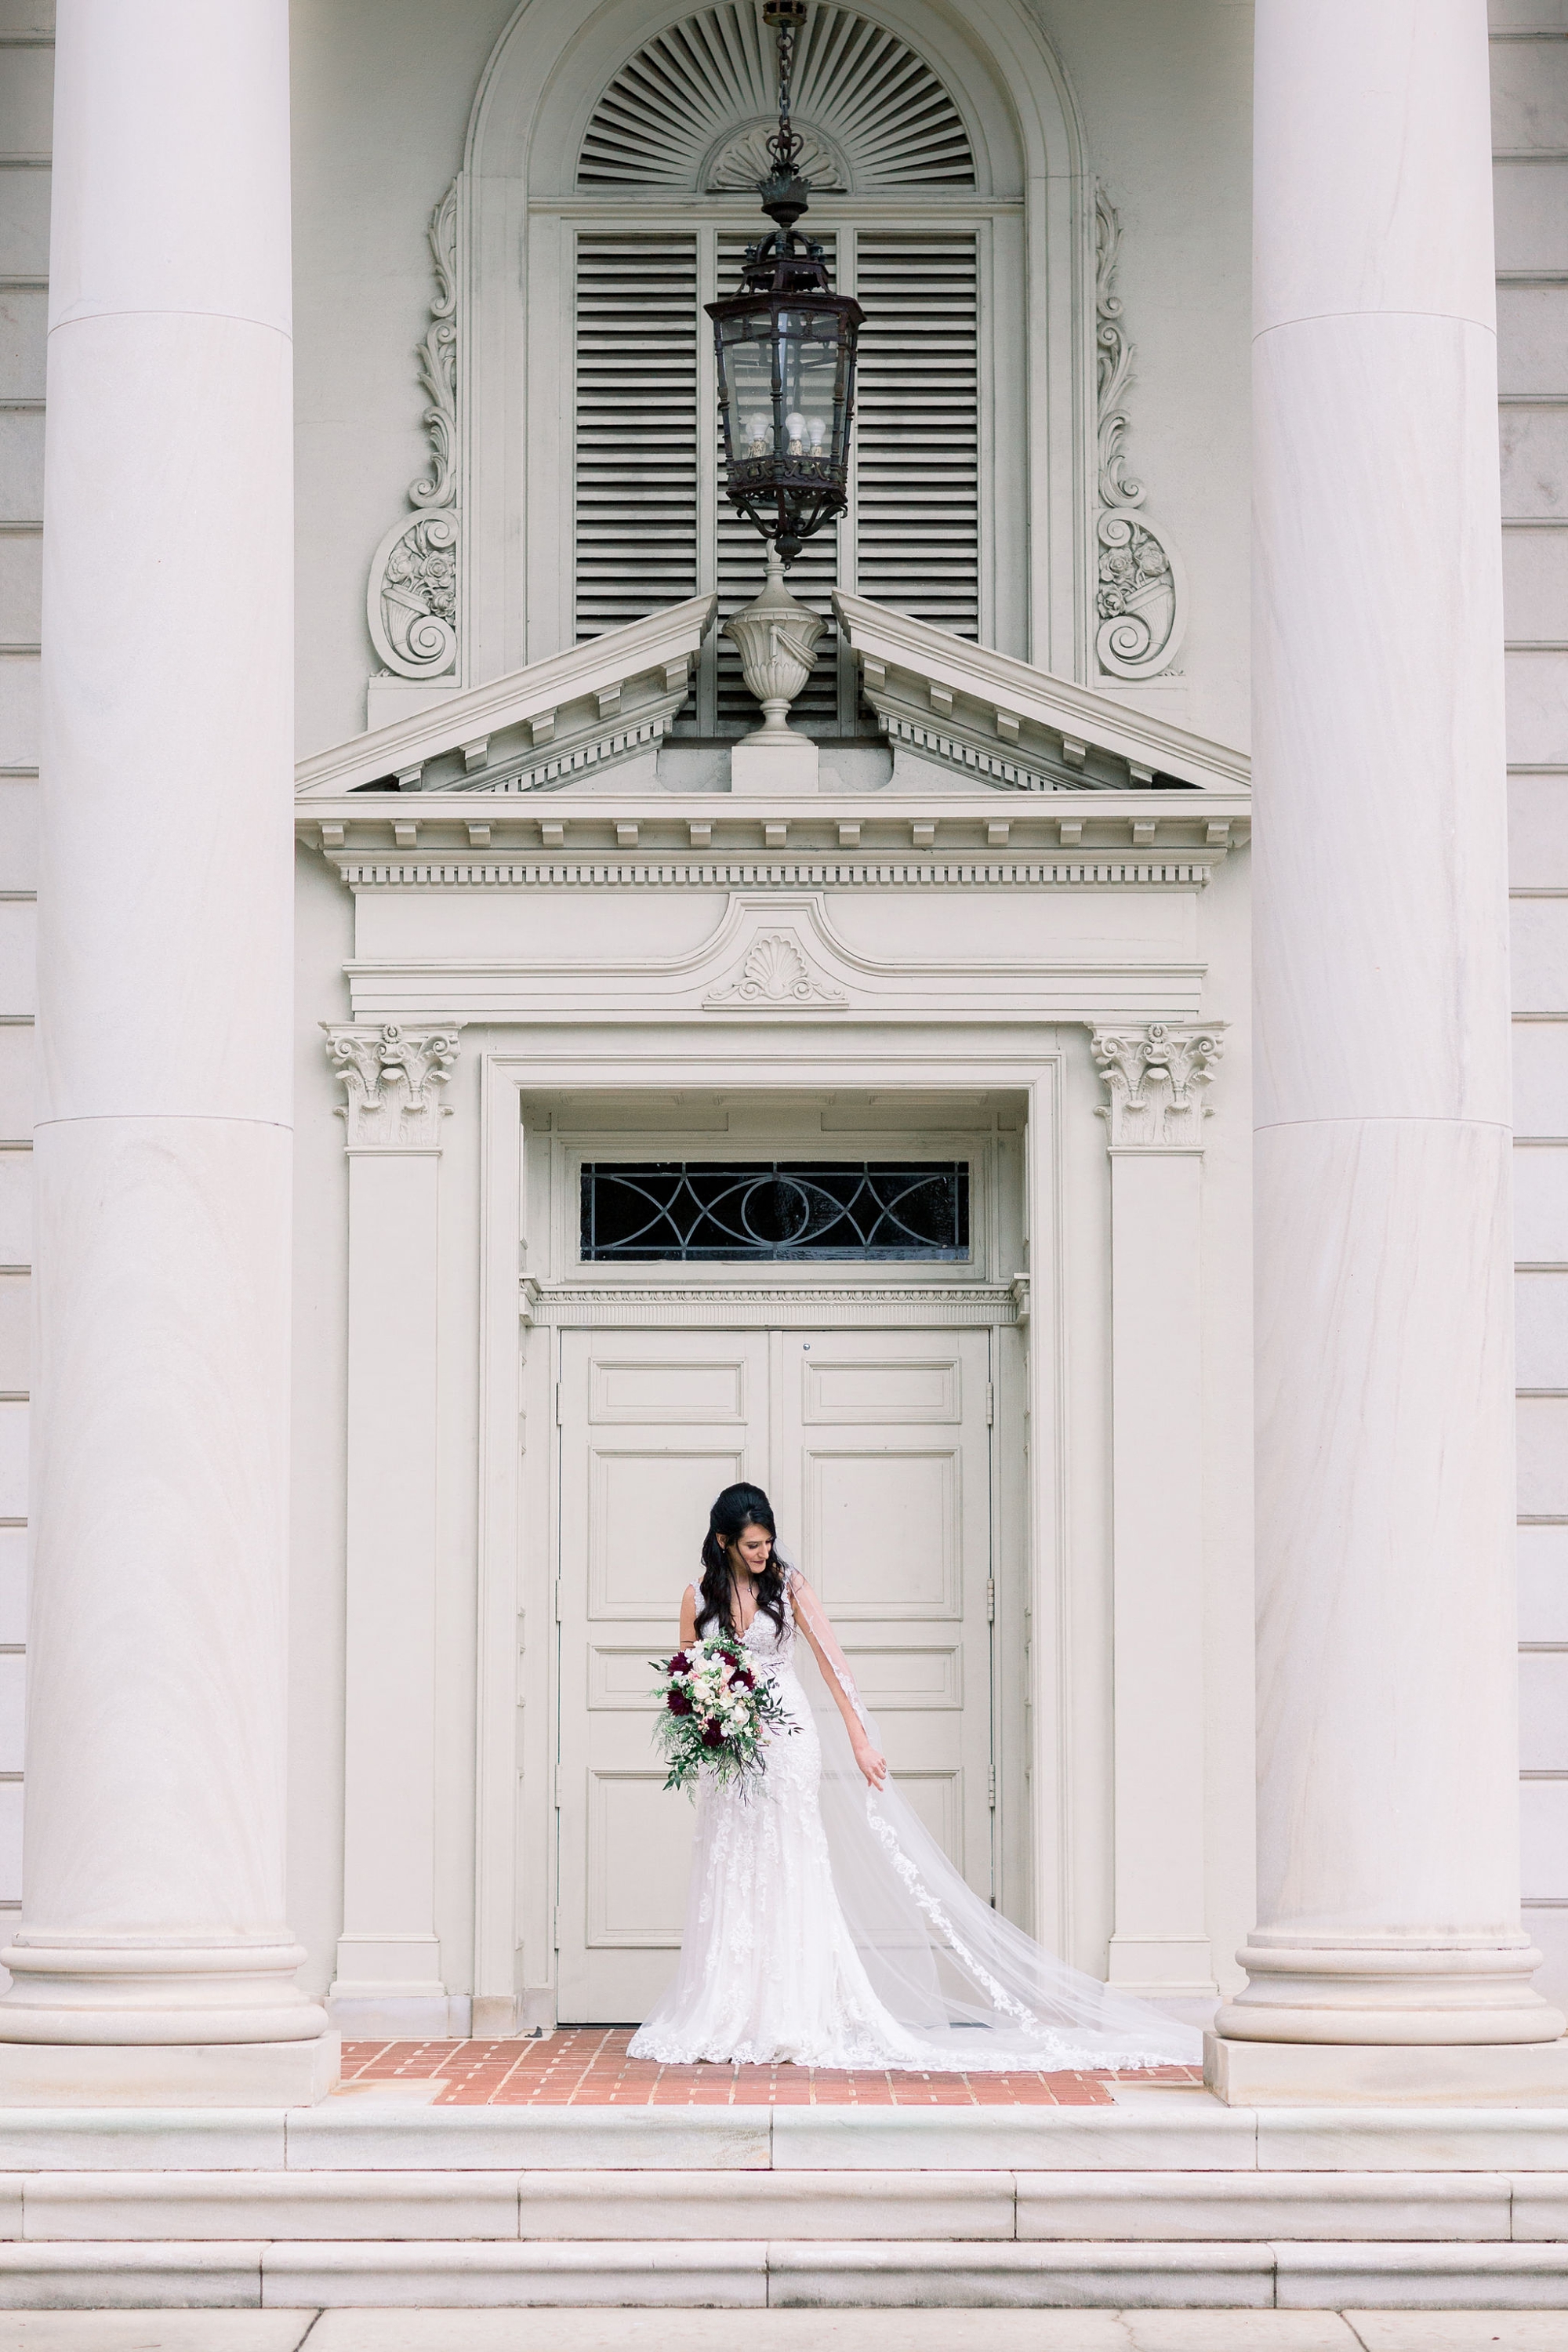 French Style Wedding Inspired By Beauty & The Beast